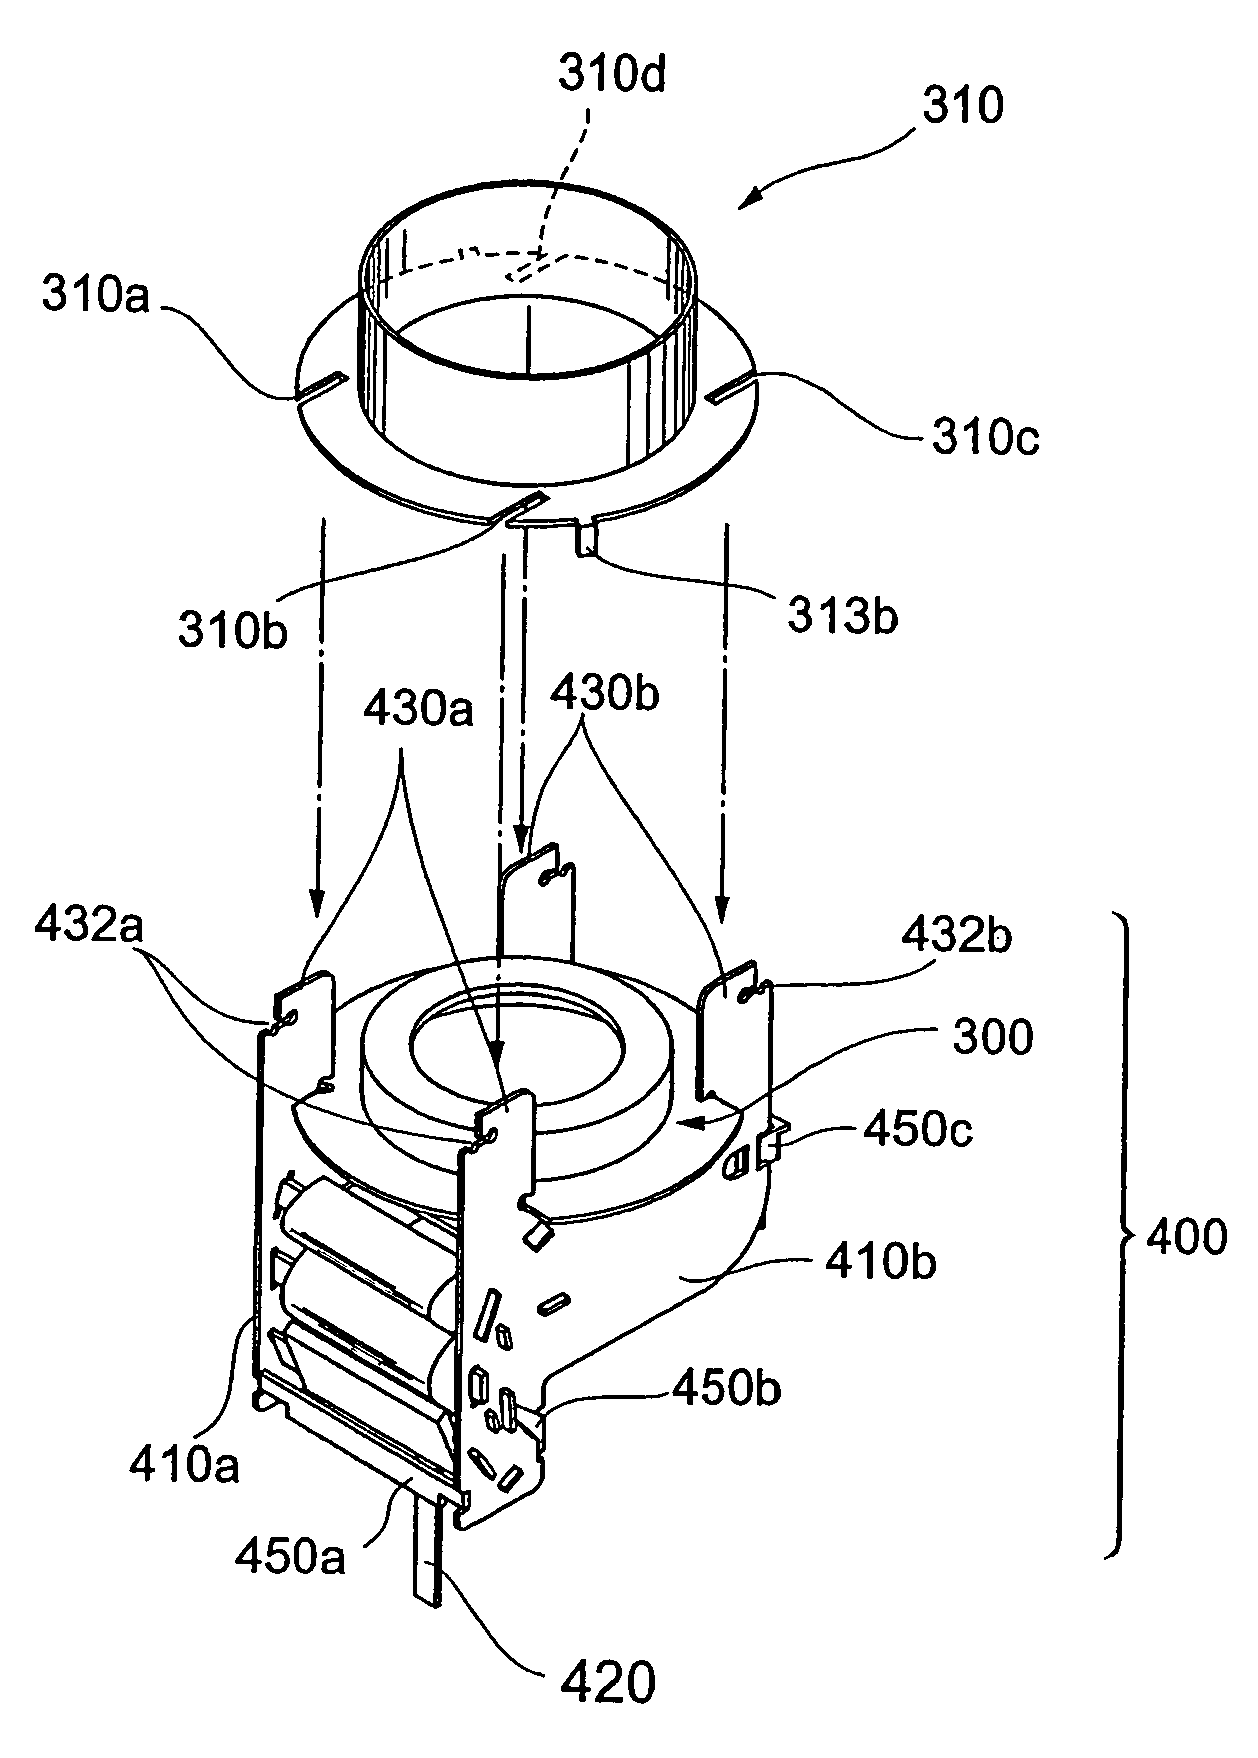 Photomultiplier including a seated container, photocathode, and a dynode unit